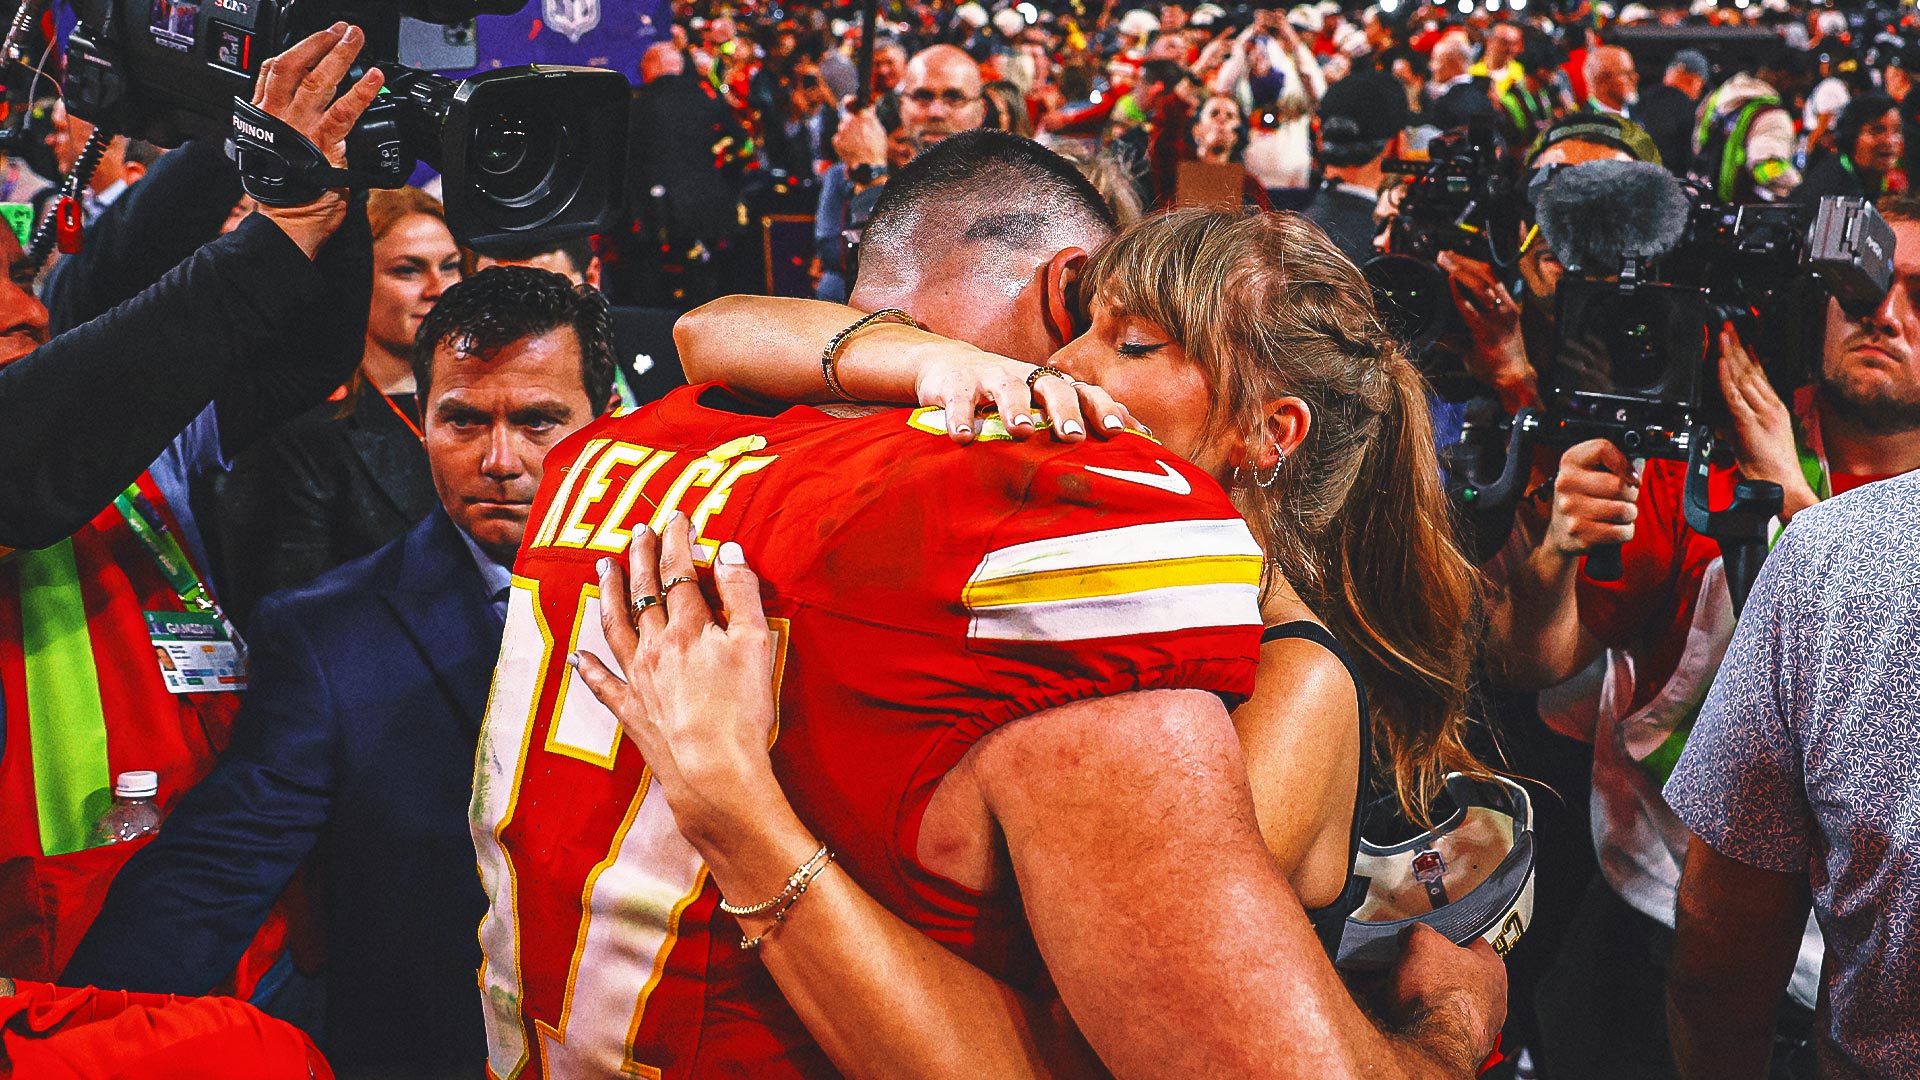 Chiefs get post-Super Bowl White House invite. Could Taylor Swift tag along?